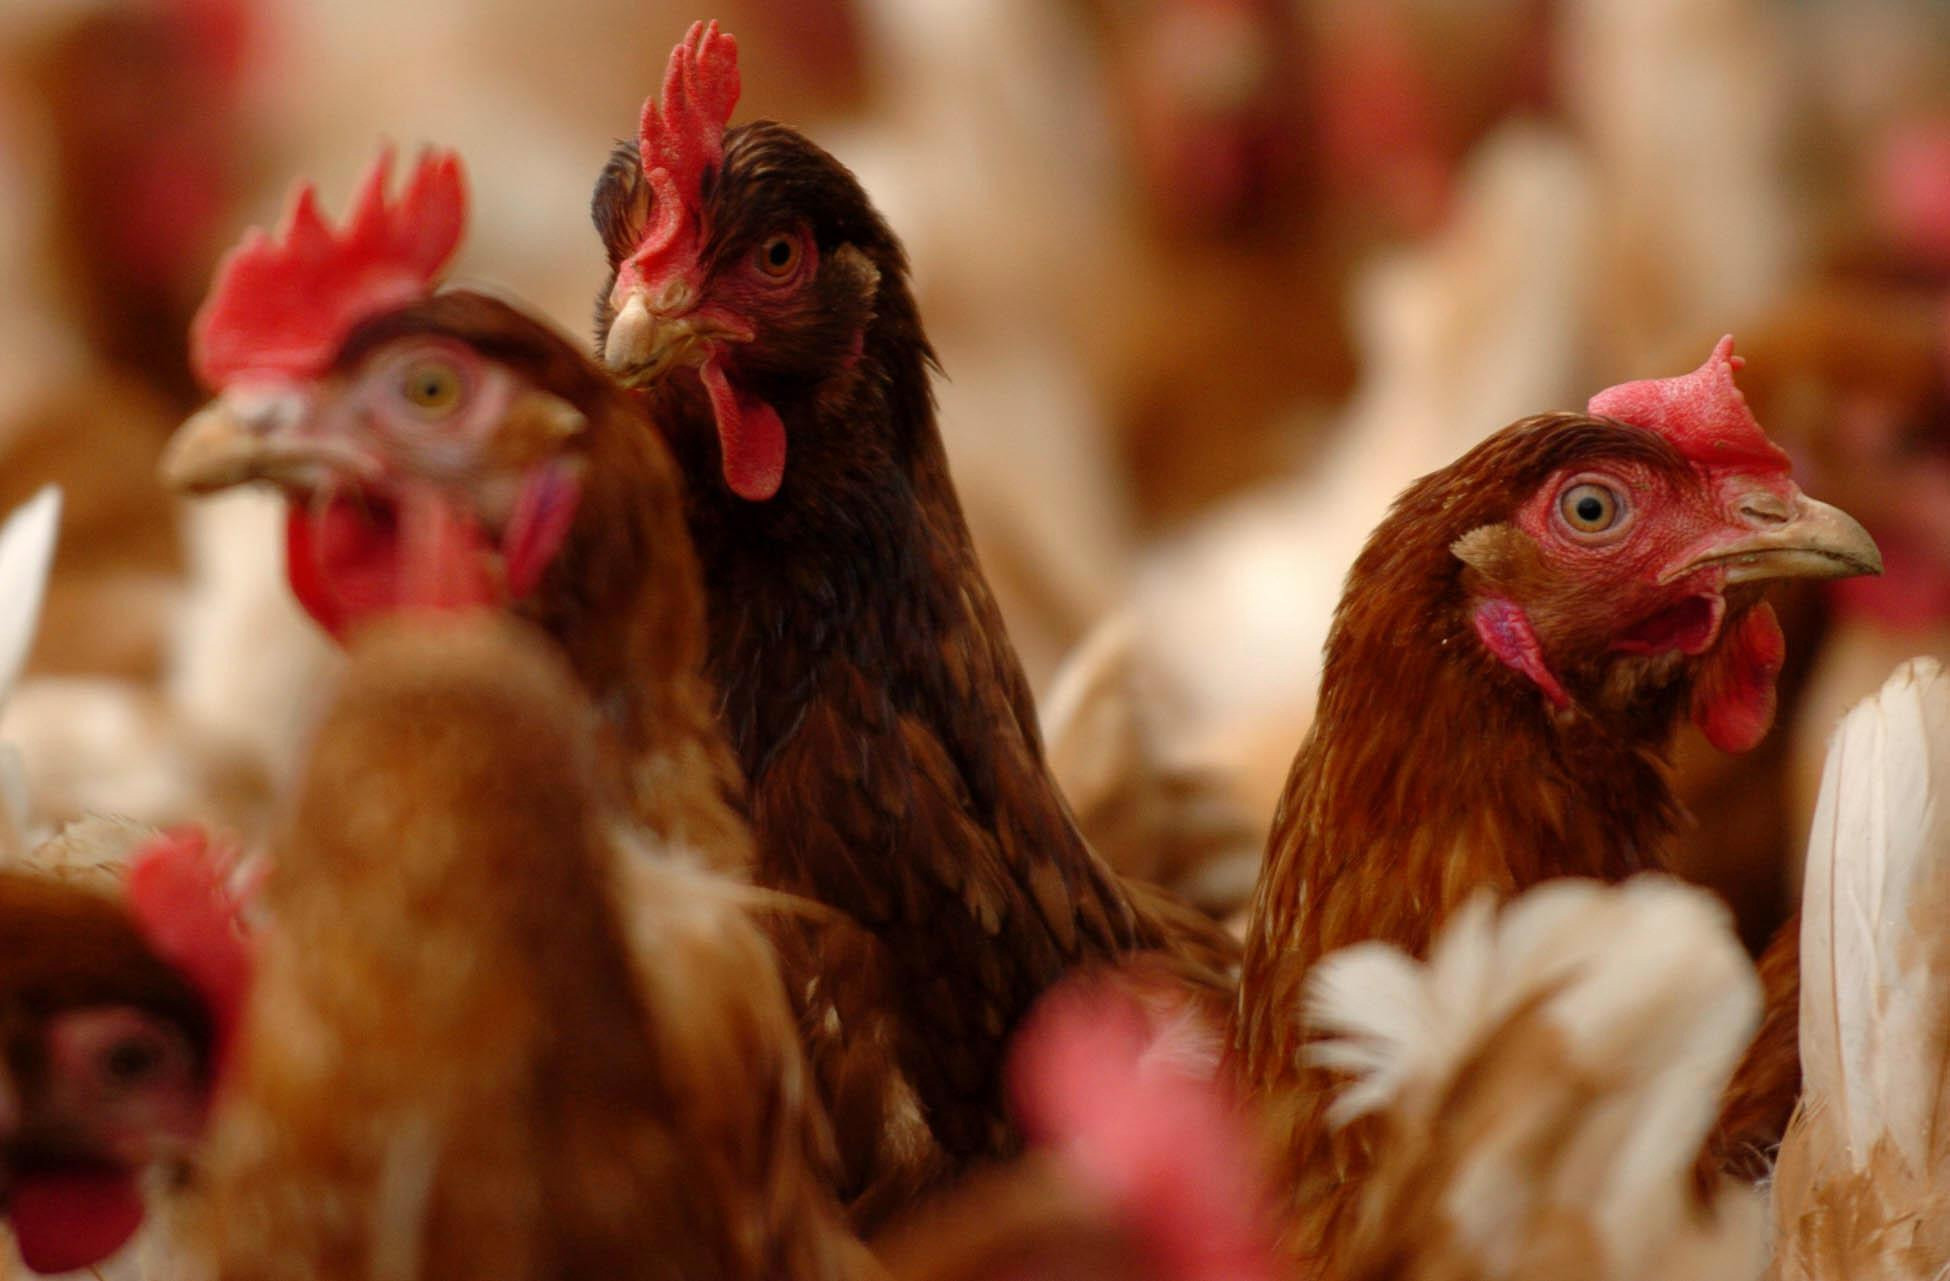 Poultry keepers have been told to enhance their biosecurity